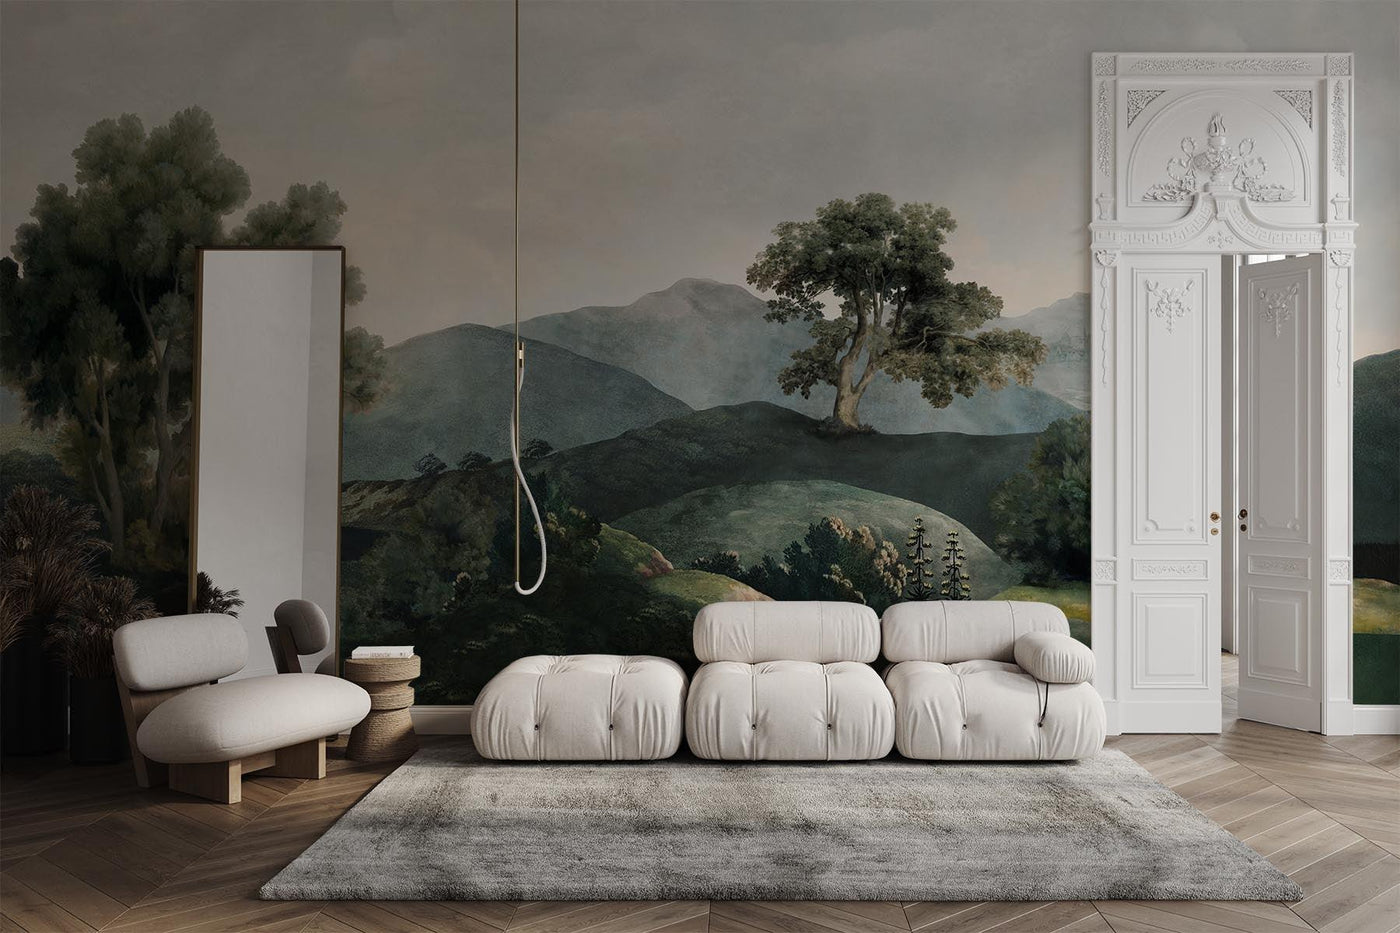 greene landscape wall mural on the wall of this living room. Wooden floor. White B&B Italia sofa. White chair. Grey rug